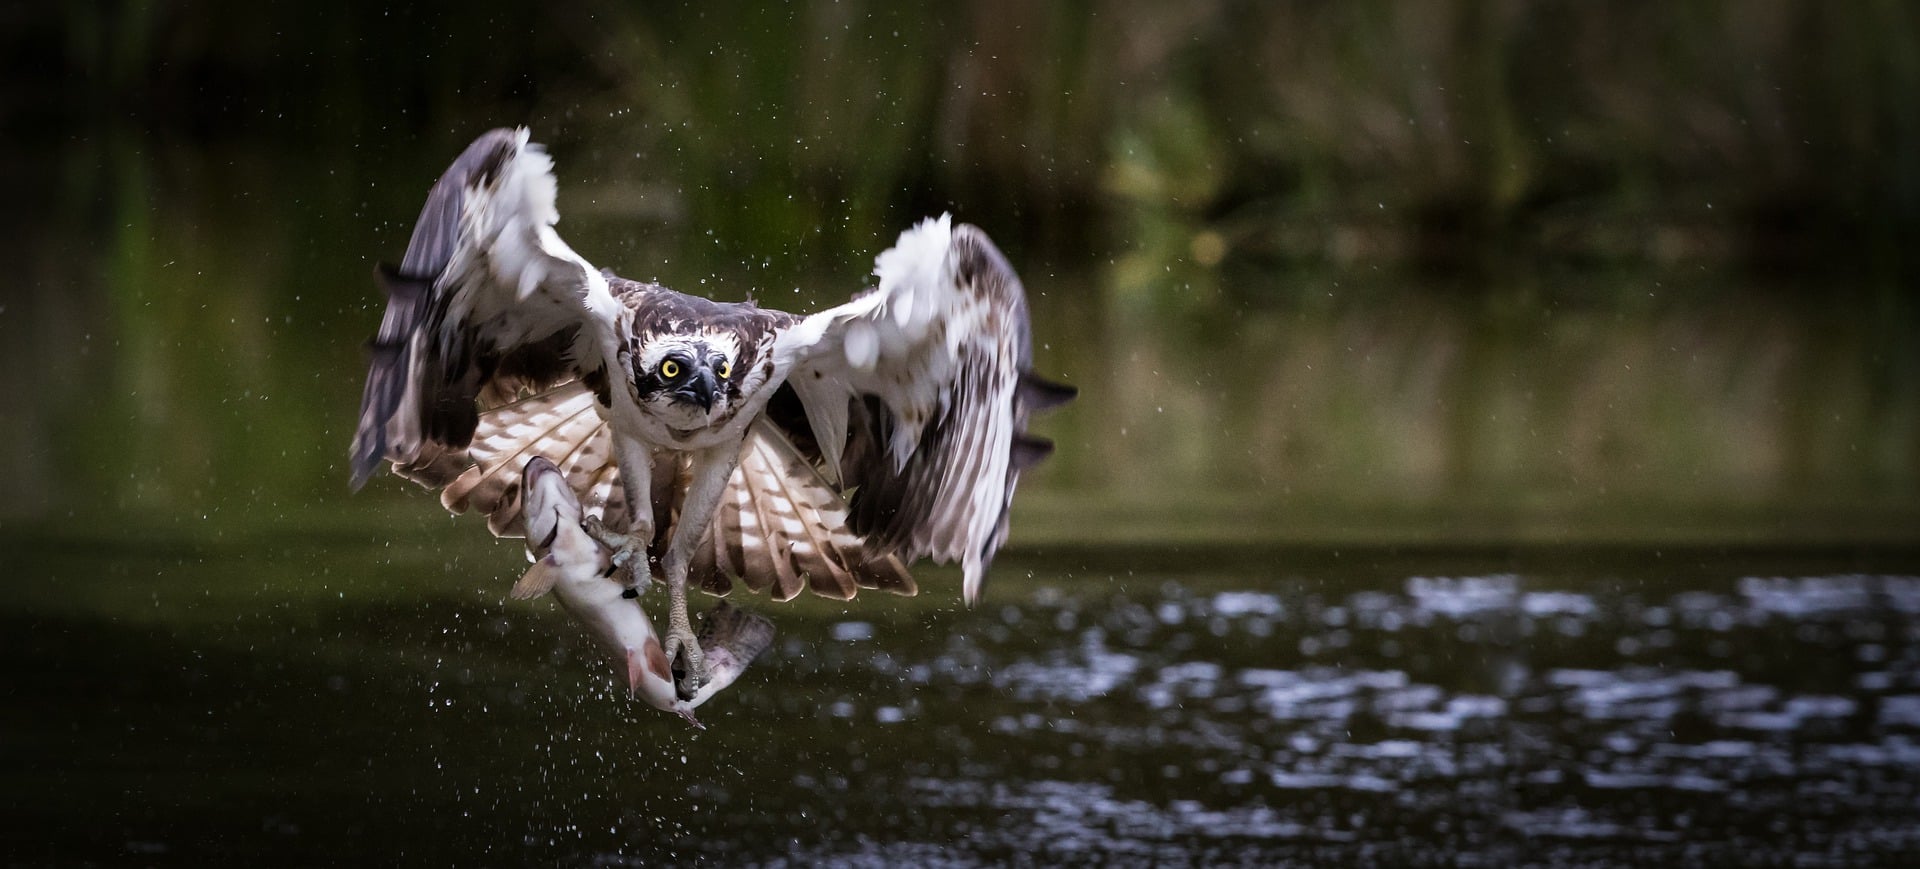 Osprey catching a fish in a river